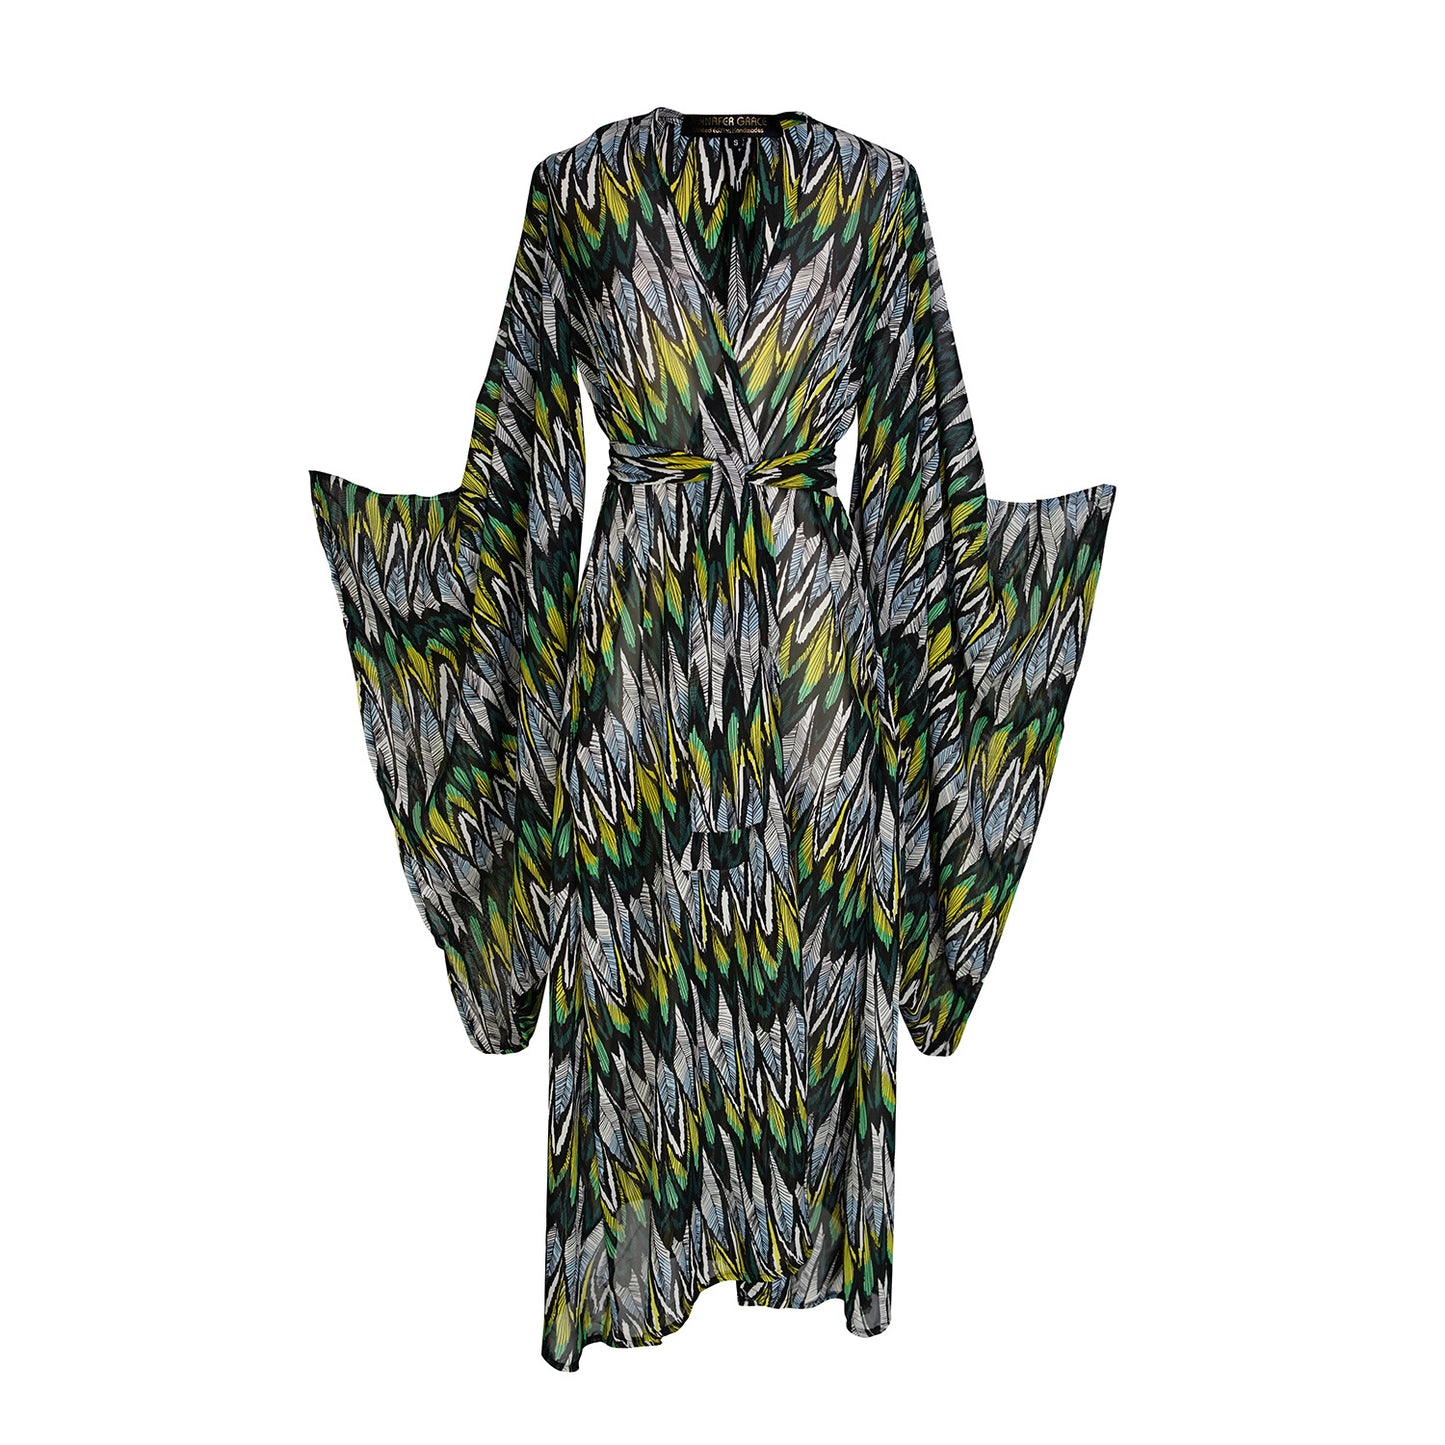 jennafer grace Macaw Verde Feather kimono semi-sheer chiffon with yellow-green and white and black feather print cover-up wrap dress with pockets duster jacket robe boho boho bohemian hippie whimsical romantic beach poolside resort cabana lounge wear unisex handmade in California USA